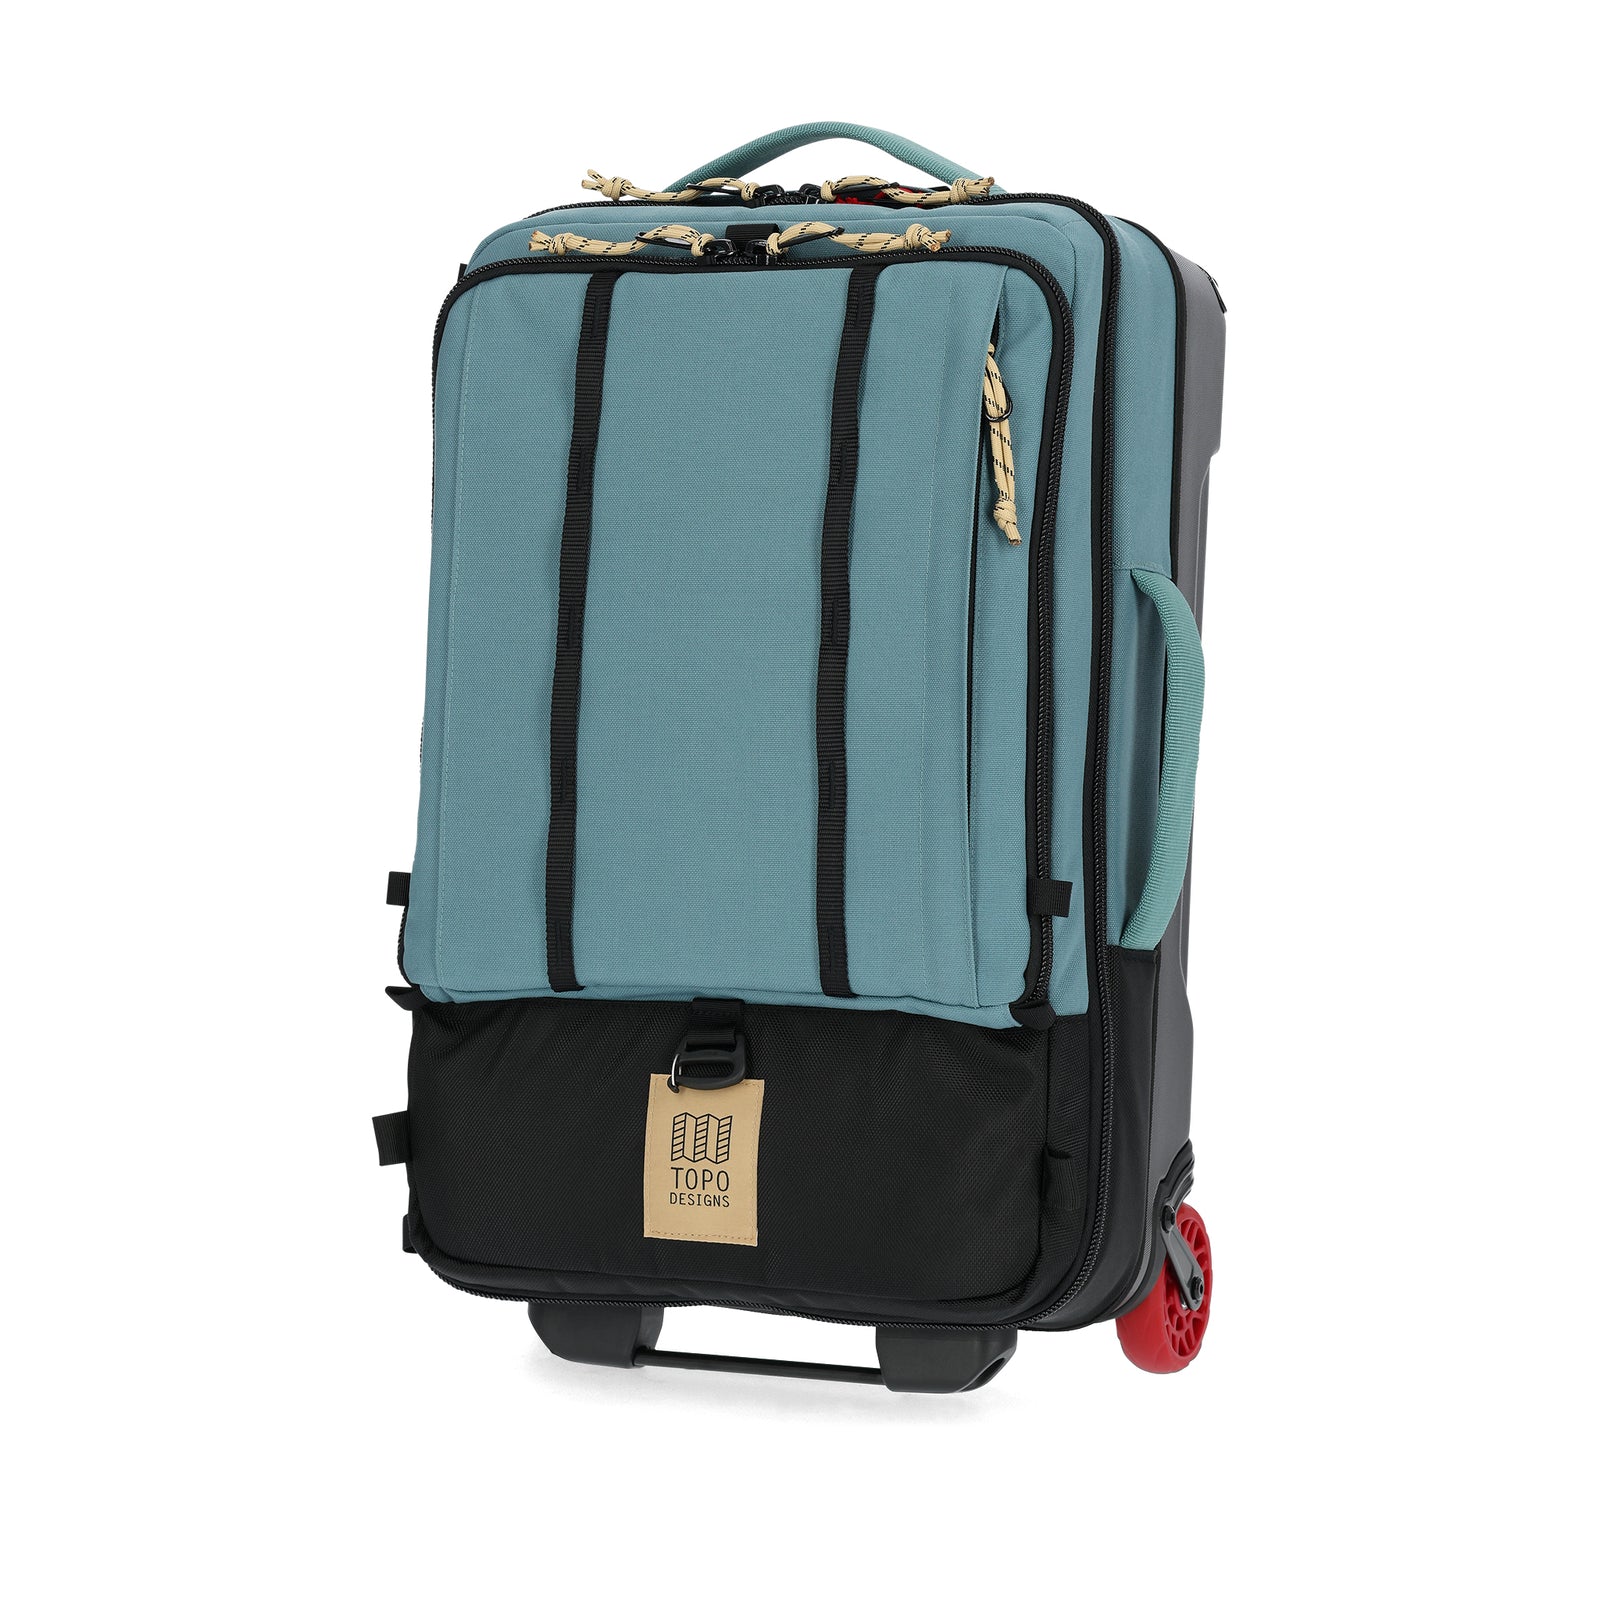 Front View of Topo Designs Global Travel Bag Roller  in "Sea Pine"